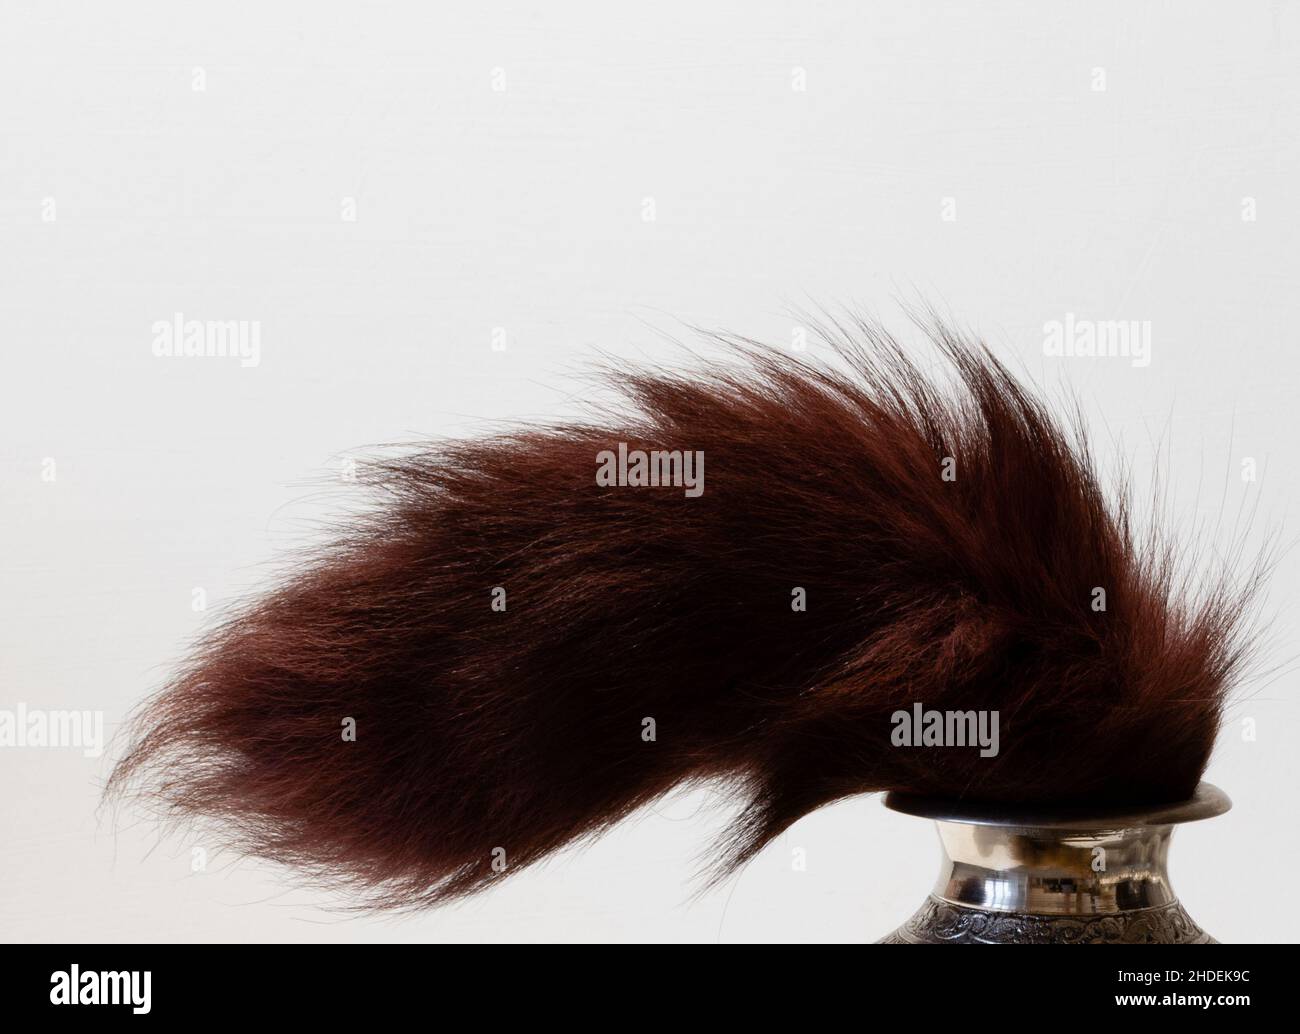 Chestnut tail of furry animal sticking out of silver jug on white background. Side view Stock Photo